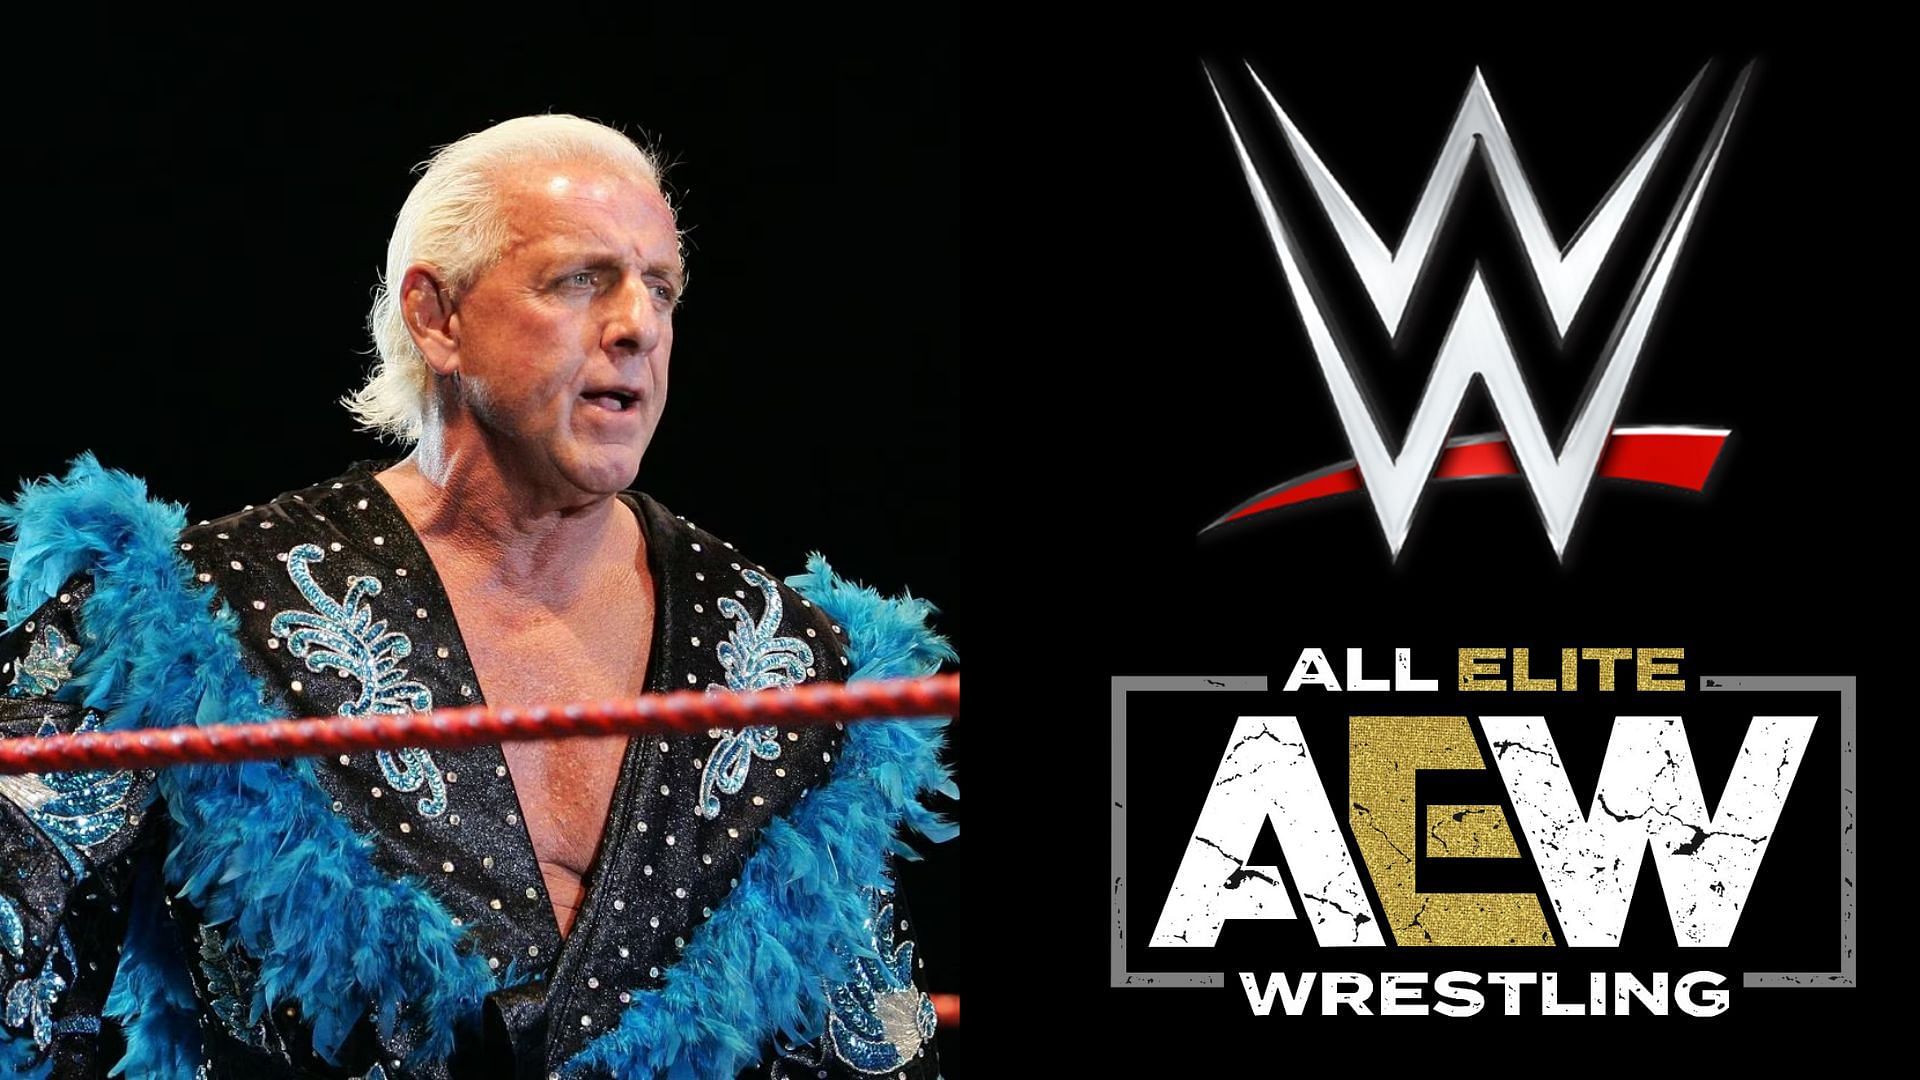 Ric Flair is one of the biggest stars of all time